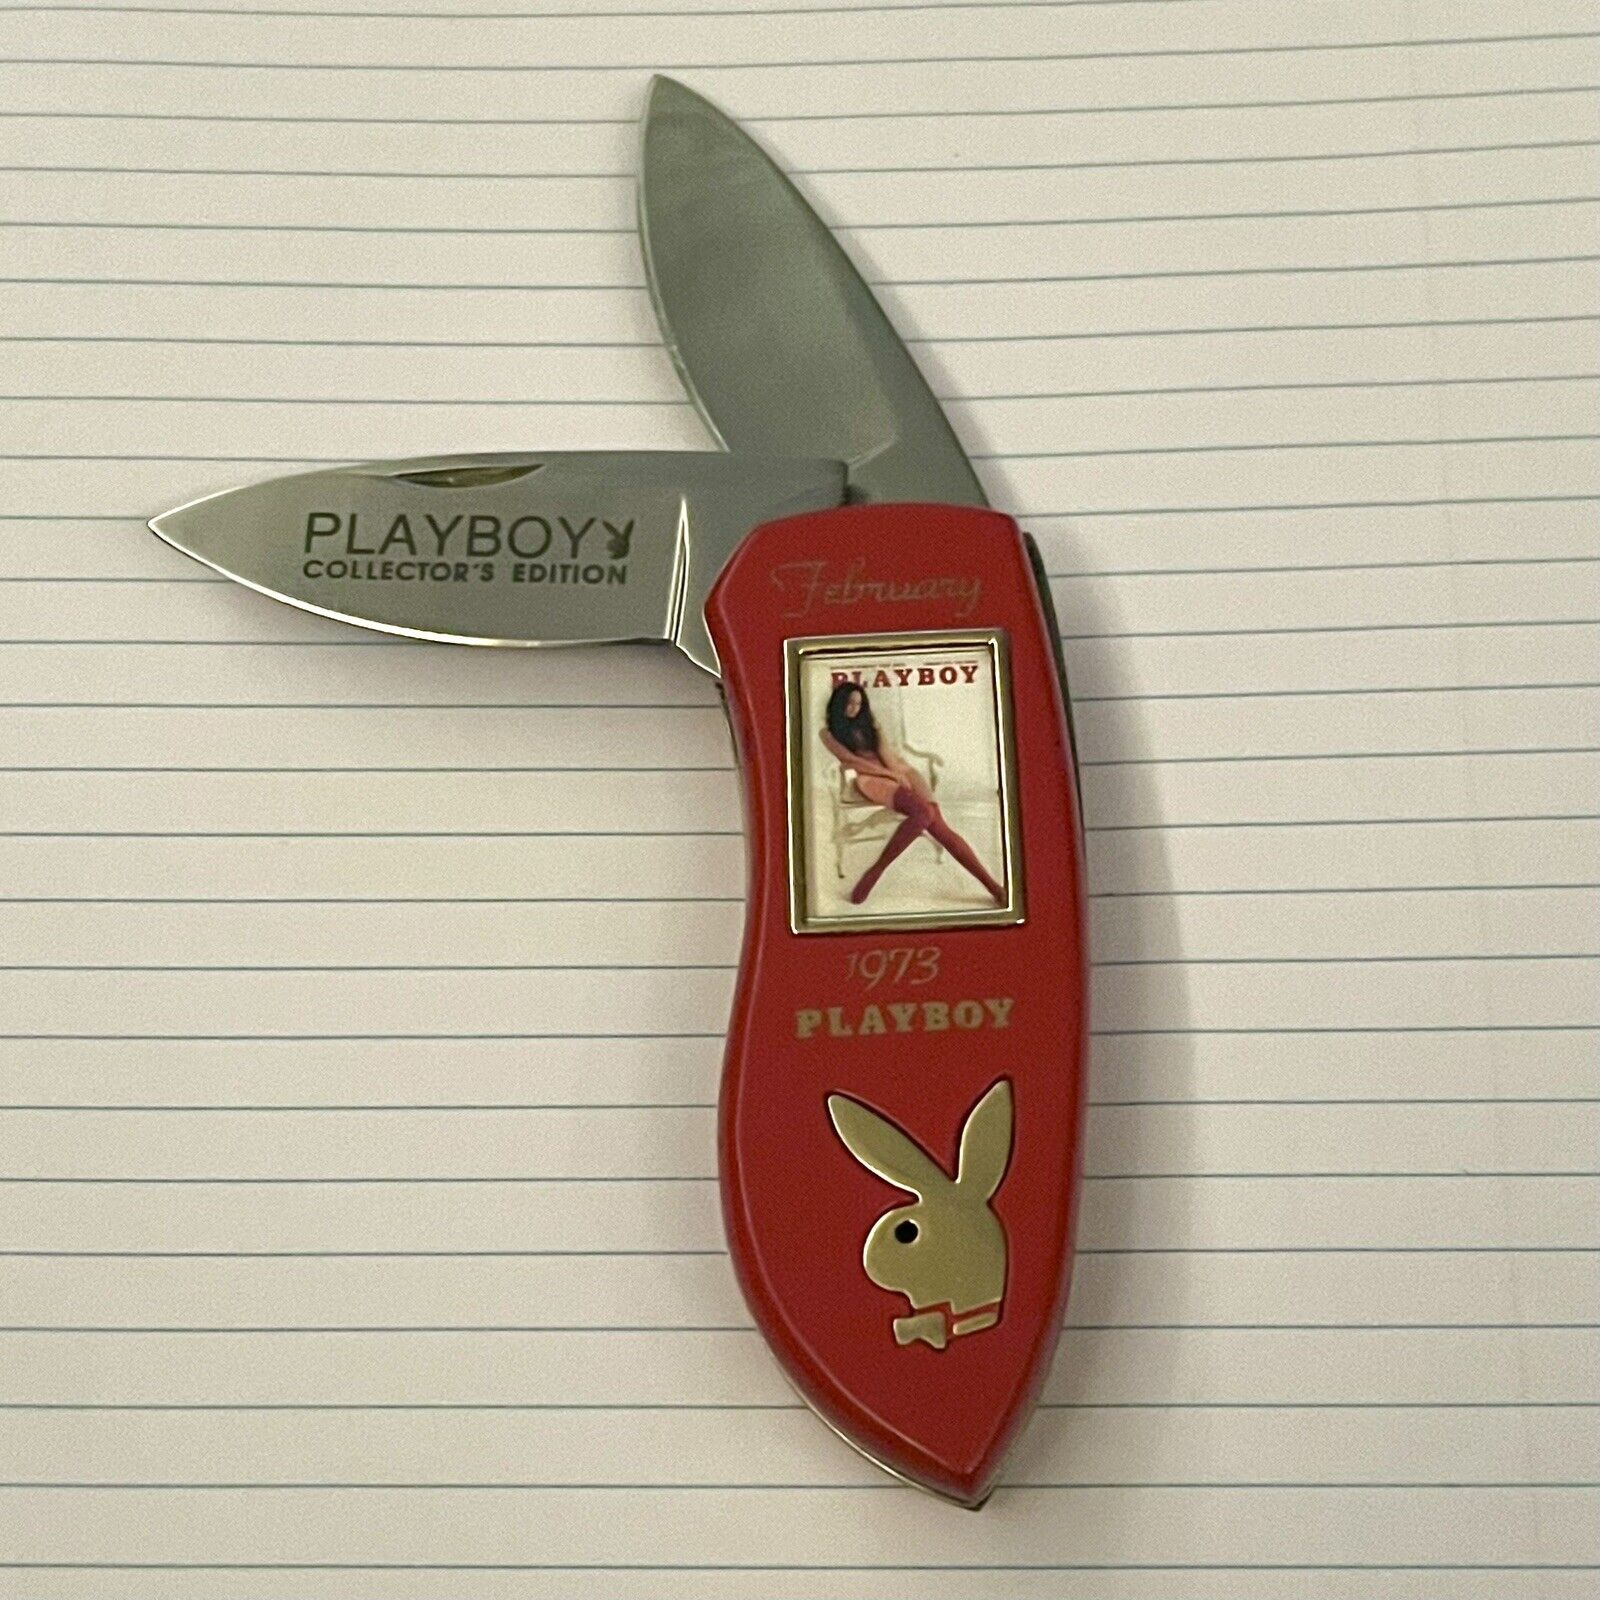 Playboy 1973 February Collector's Edition Pocket Knife - Excellent Condition